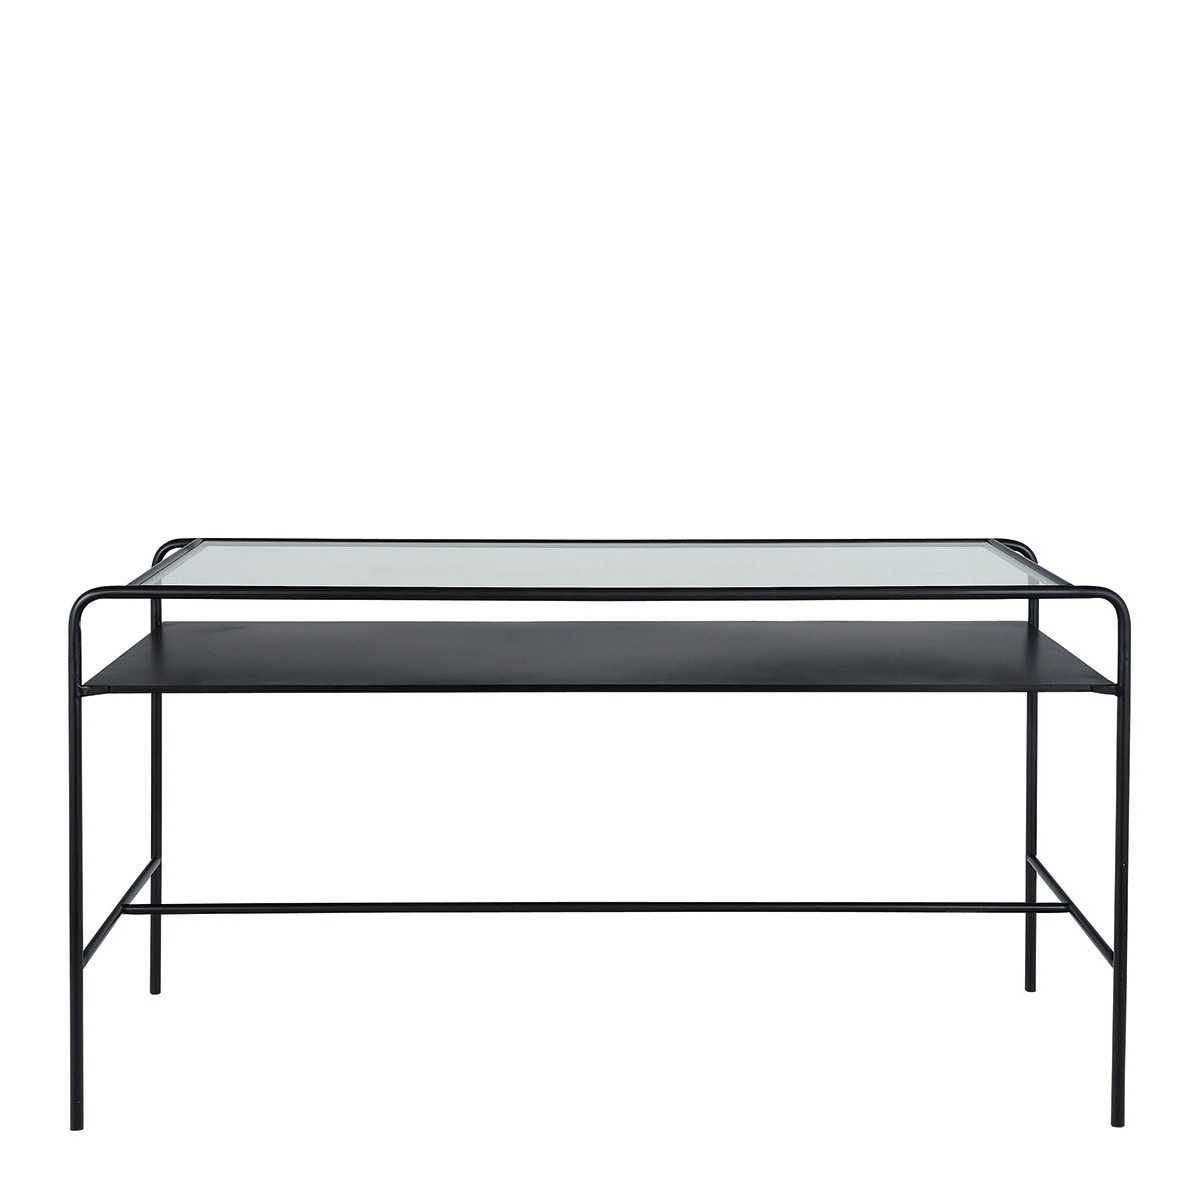 ERNEST desk in black metal and glass top